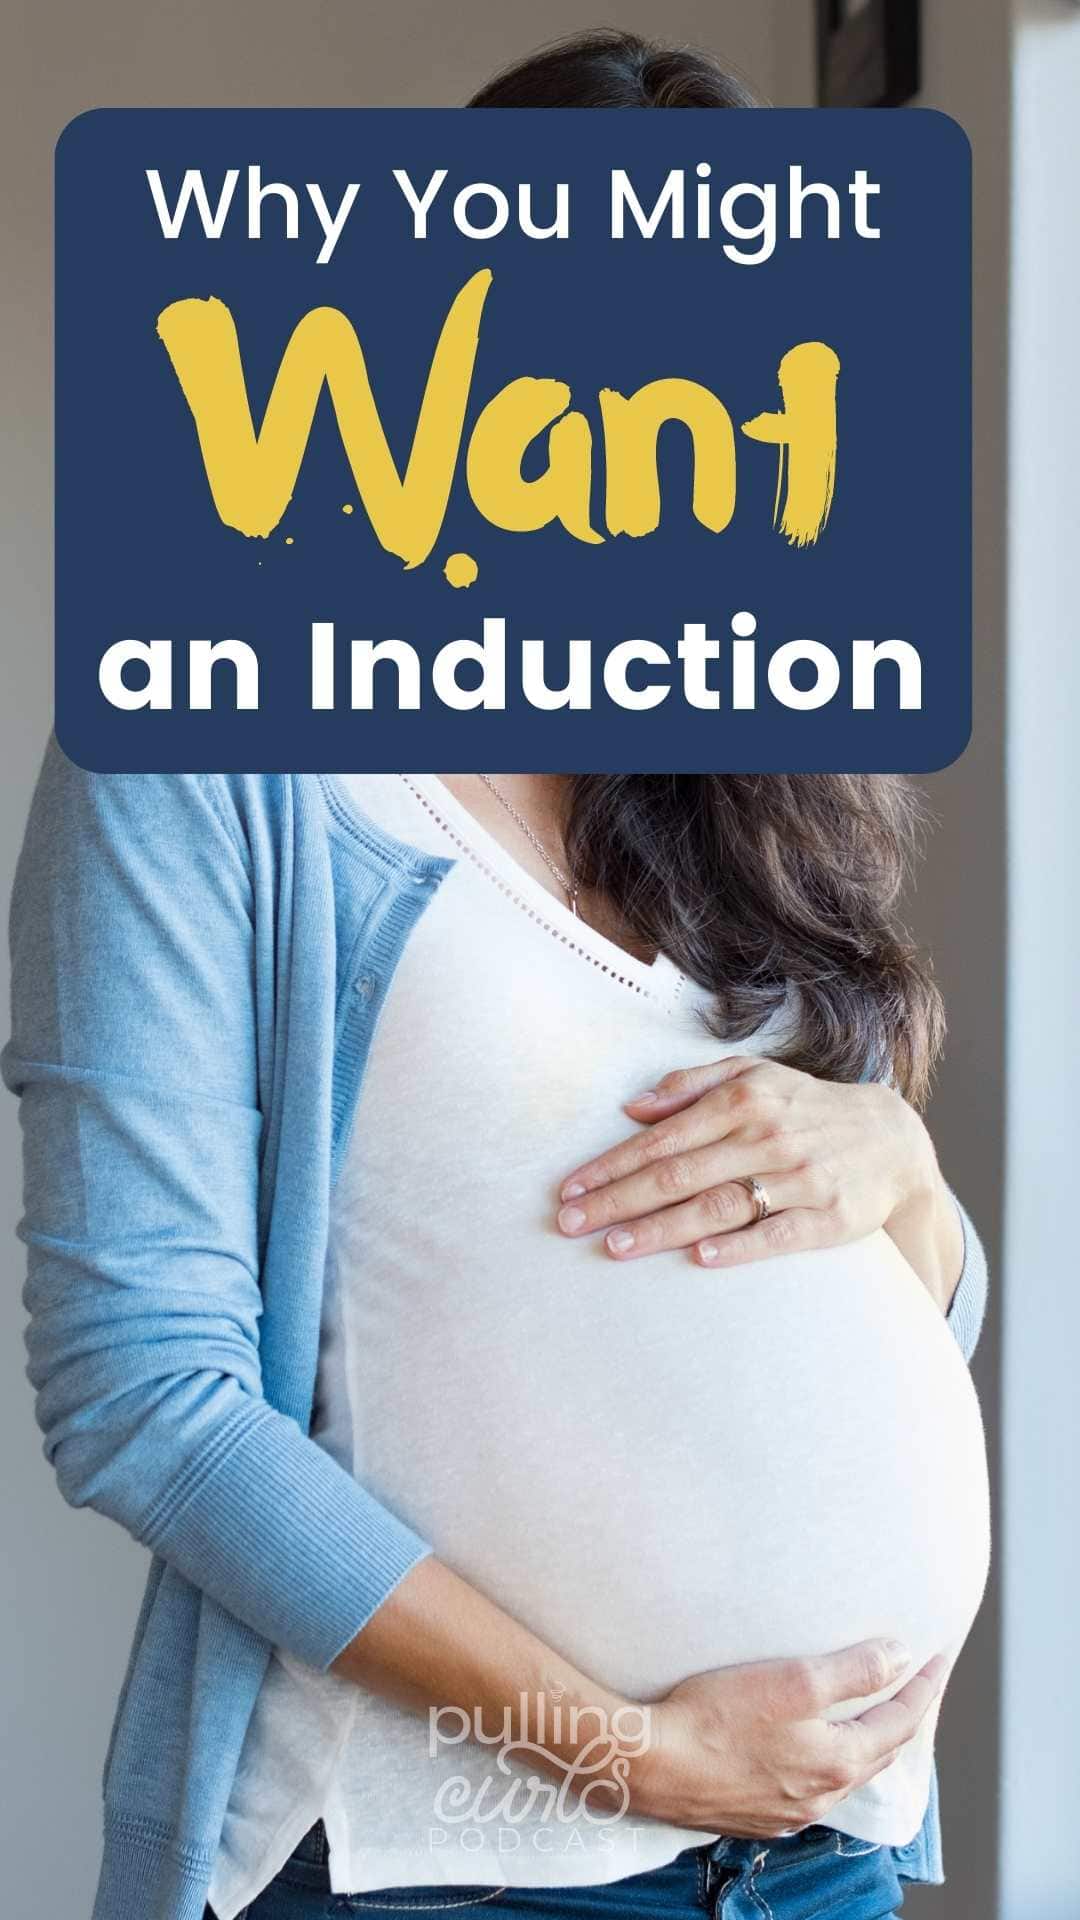 Let's talk about why you may WANT an induction, especially as you get towards the end of your pregnancy. via @pullingcurls